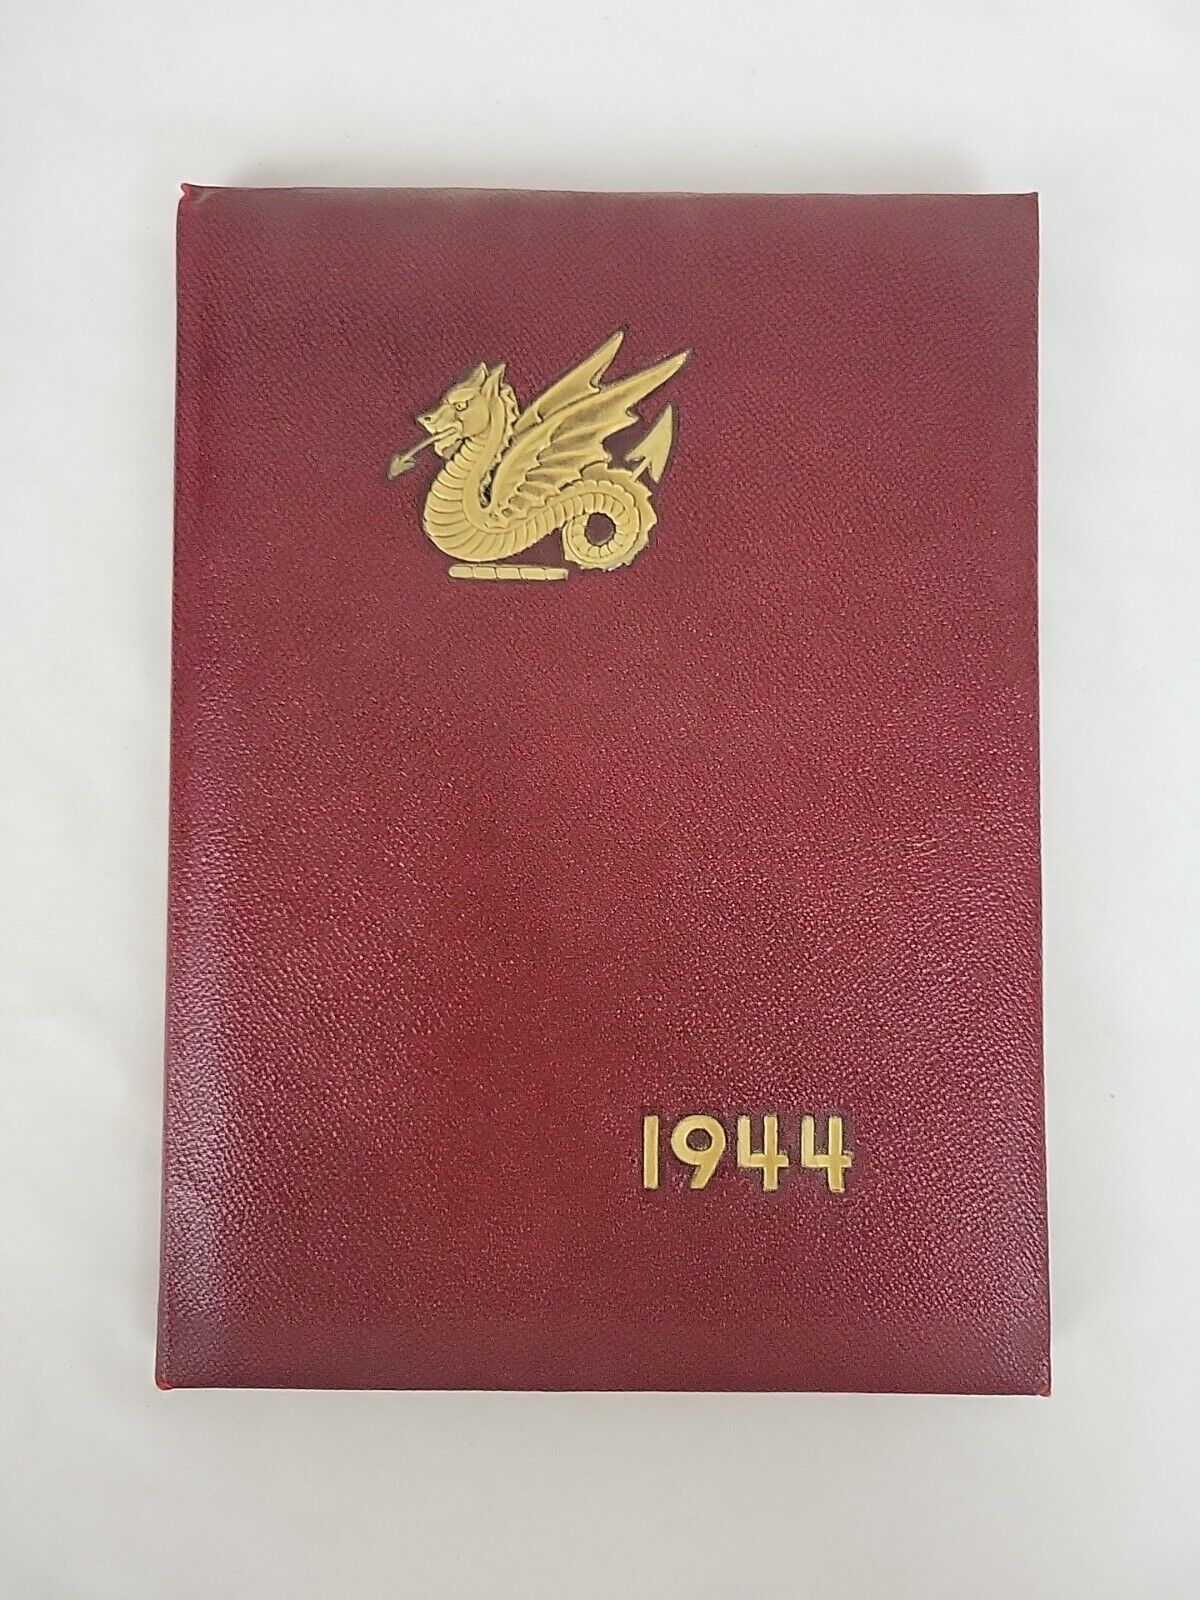 Kingswood School West Hartford Connecticut 1944 Class Yearbook